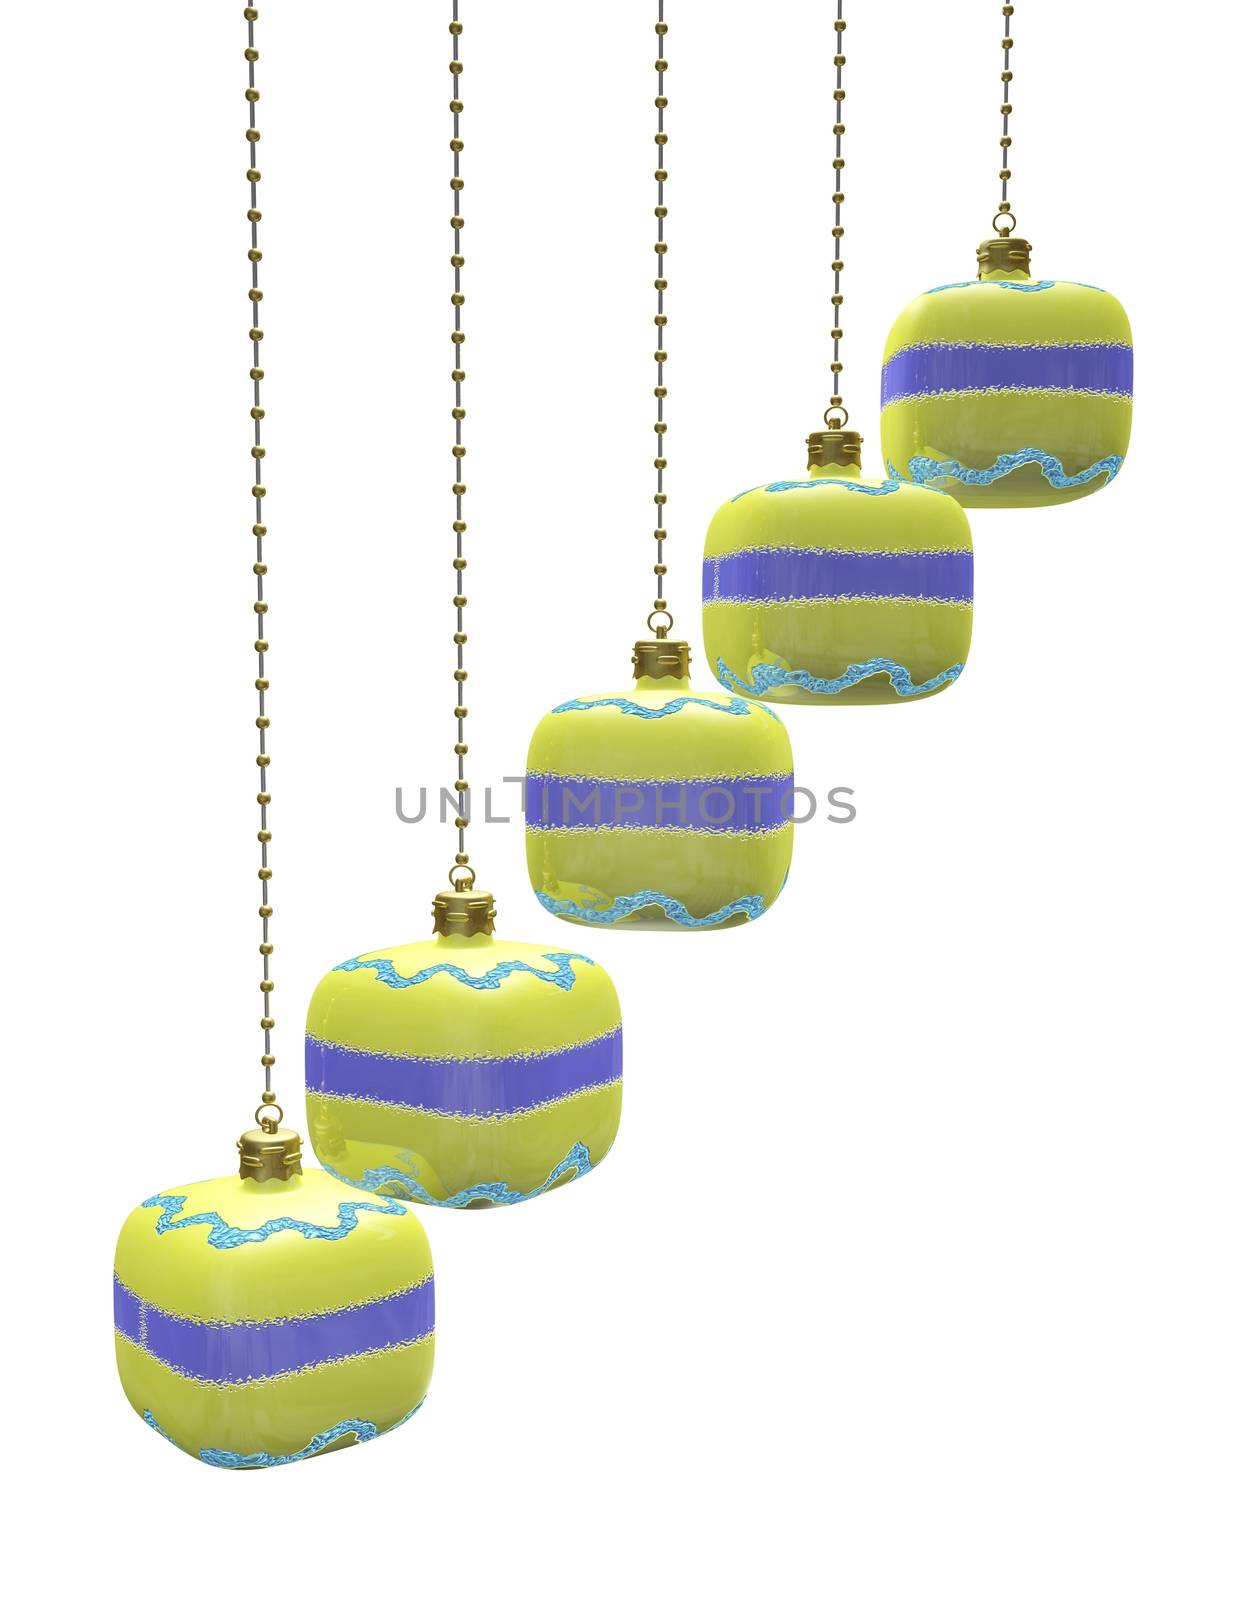 Hanging Christmas Decoration Baubles by RichieThakur